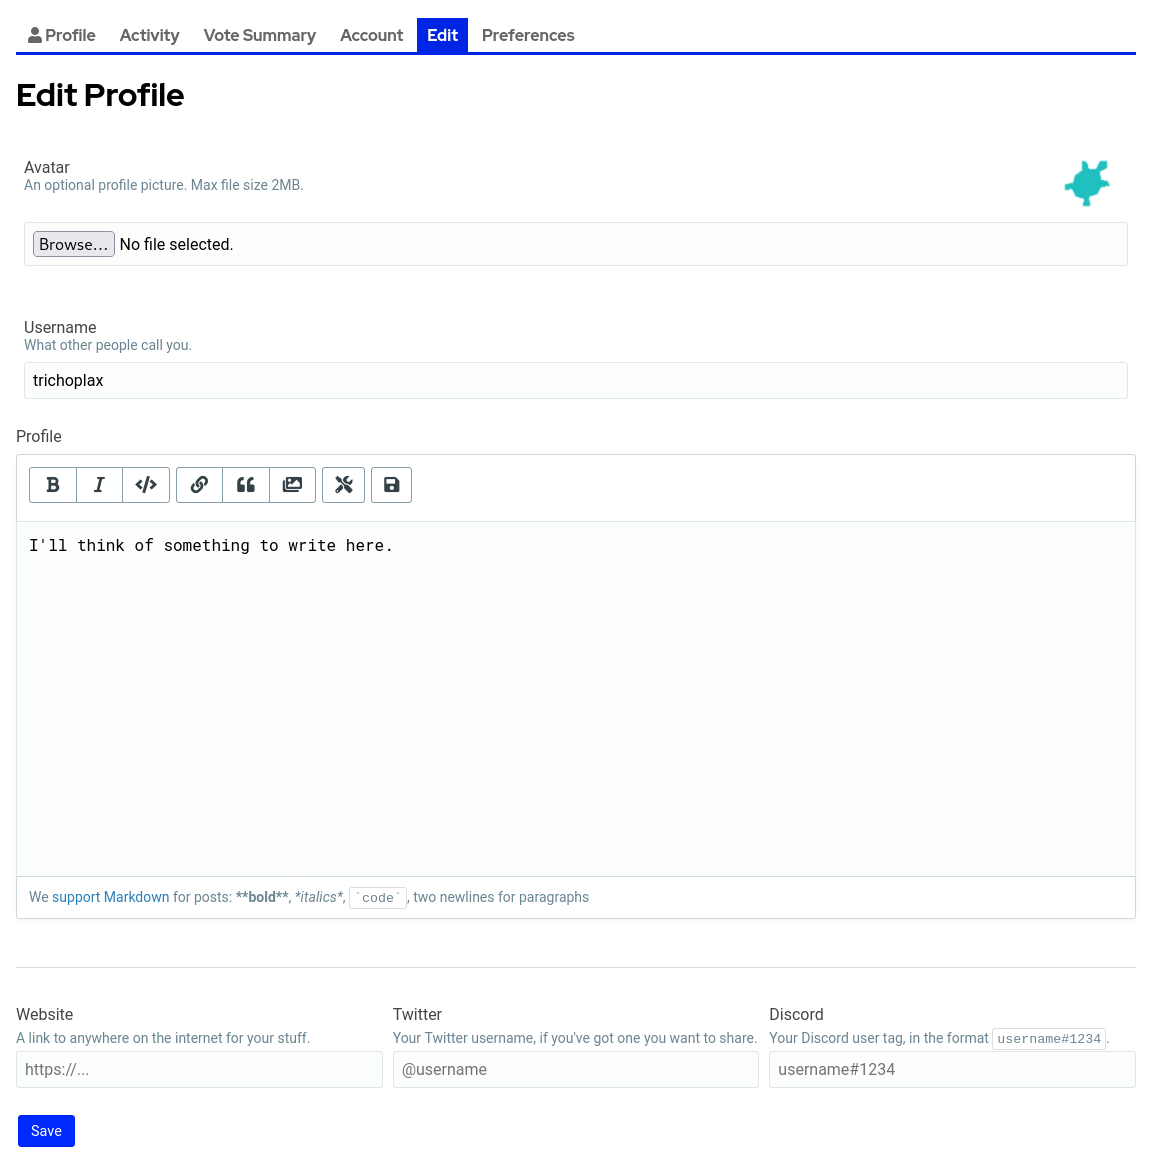 Edit Profile page with filler text in the Profile field